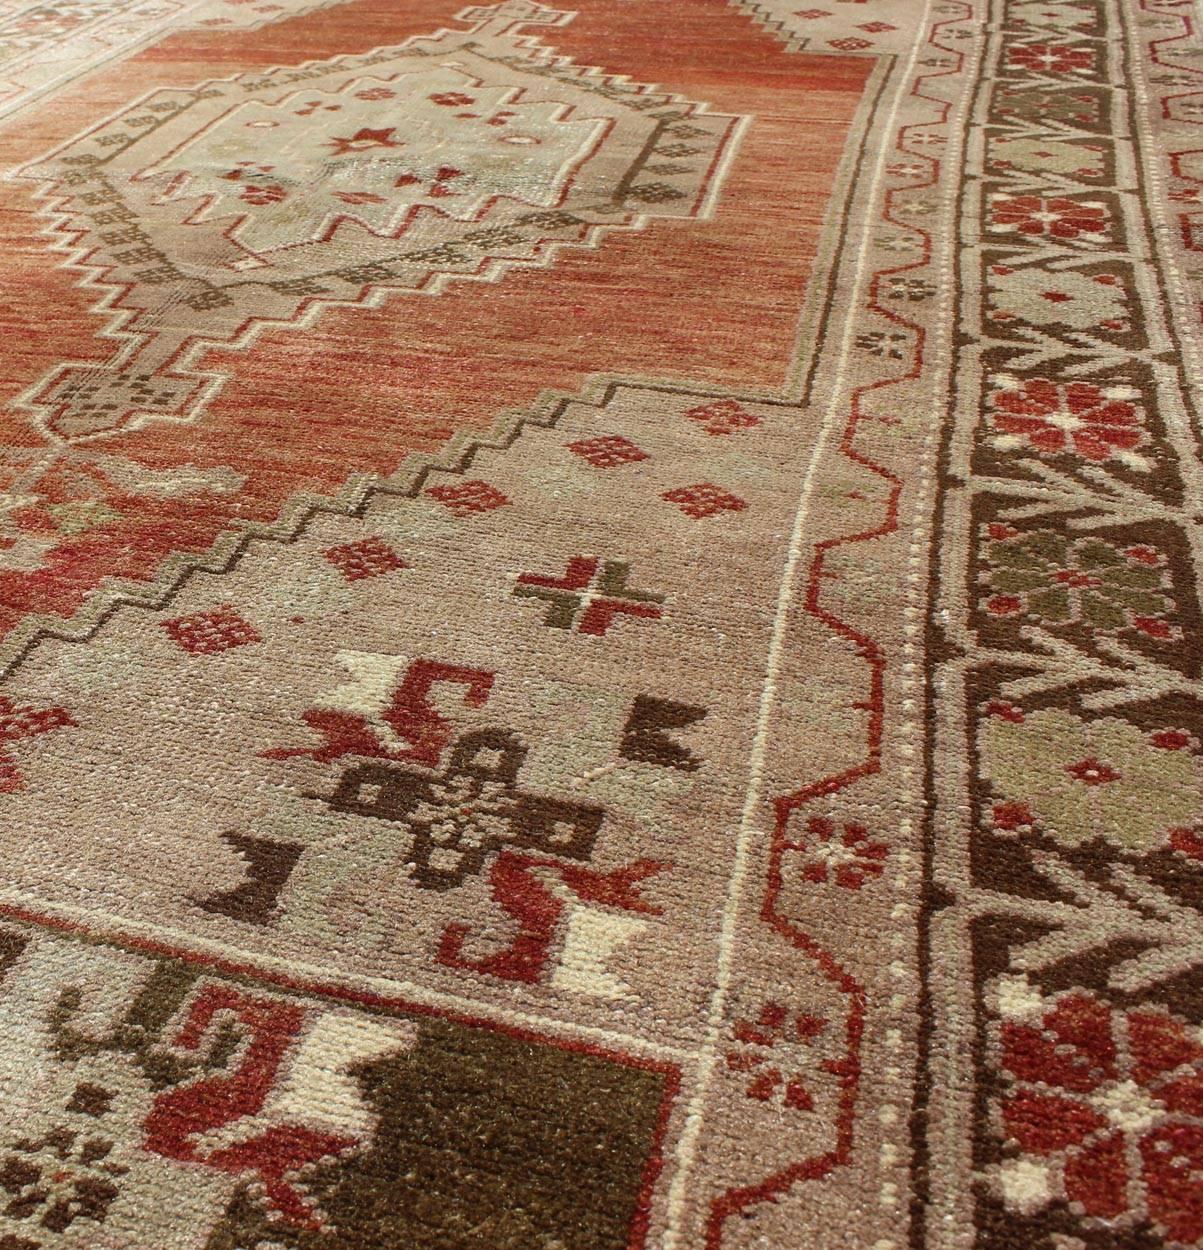 Vintage Oushak Rug With Geometric Motifs in Terracotta, Green and Tan In Excellent Condition For Sale In Atlanta, GA